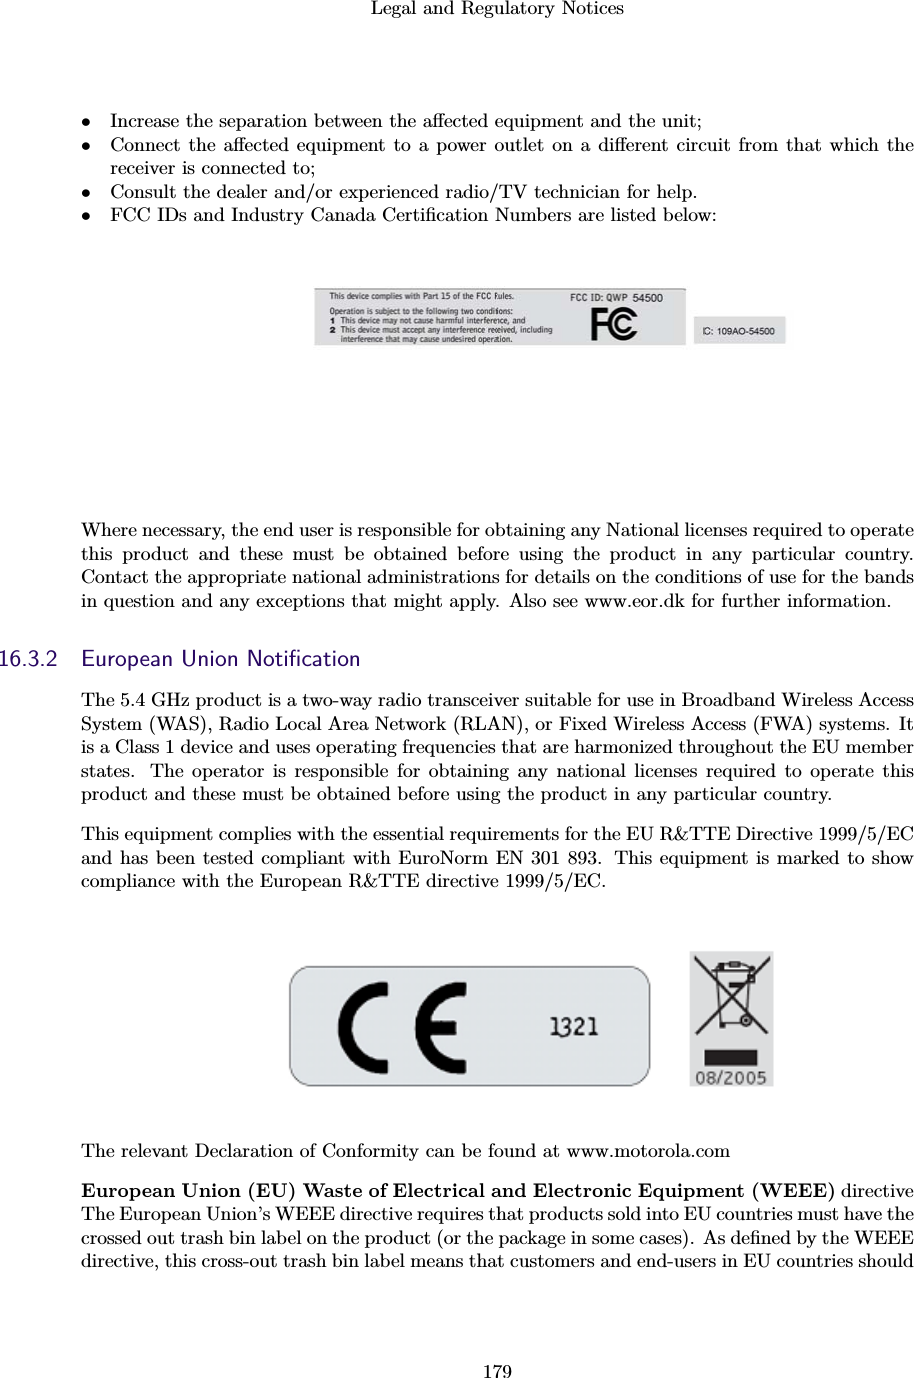 Legal and Regulatory Notices179•Increase the separation between the aﬀected equipment and the unit;•Connect the aﬀected equipment to a power outlet on a diﬀerent circuit from that which thereceiver is connected to;•Consult the dealer and/or experienced radio/TV technician for help.•FCC IDs and Industry Canada Certiﬁcation Numbers are listed below:Where necessary, the end user is responsible for obtaining any National licenses required to operatethis product and these must be obtained before using the product in any particular country.Contact the appropriate national administrations for details on the conditions of use for the bandsin question and any exceptions that might apply. Also see www.eor.dk for further information.16.3.2 European Union NotiﬁcationThe 5.4 GHz product is a two-way radio transceiver suitable for use in Broadband Wireless AccessSystem (WAS), Radio Local Area Network (RLAN), or Fixed Wireless Access (FWA) systems. Itis a Class 1 device and uses operating frequencies that are harmonized throughout the EU memberstates. The operator is responsible for obtaining any national licenses required to operate thisproduct and these must be obtained before using the product in any particular country.This equipment complies with the essential requirements for the EU R&amp;TTE Directive 1999/5/ECand has been tested compliant with EuroNorm EN 301 893. This equipment is marked to showcompliance with the European R&amp;TTE directive 1999/5/EC.The relevant Declaration of Conformity can be found at www.motorola.comEuropean Union (EU) Waste of Electrical and Electronic Equipment (WEEE) directiveThe European Union’s WEEE directive requires that products sold into EU countries must have thecrossed out trash bin label on the product (or the package in some cases). As deﬁned by the WEEEdirective, this cross-out trash bin label means that customers and end-users in EU countries should